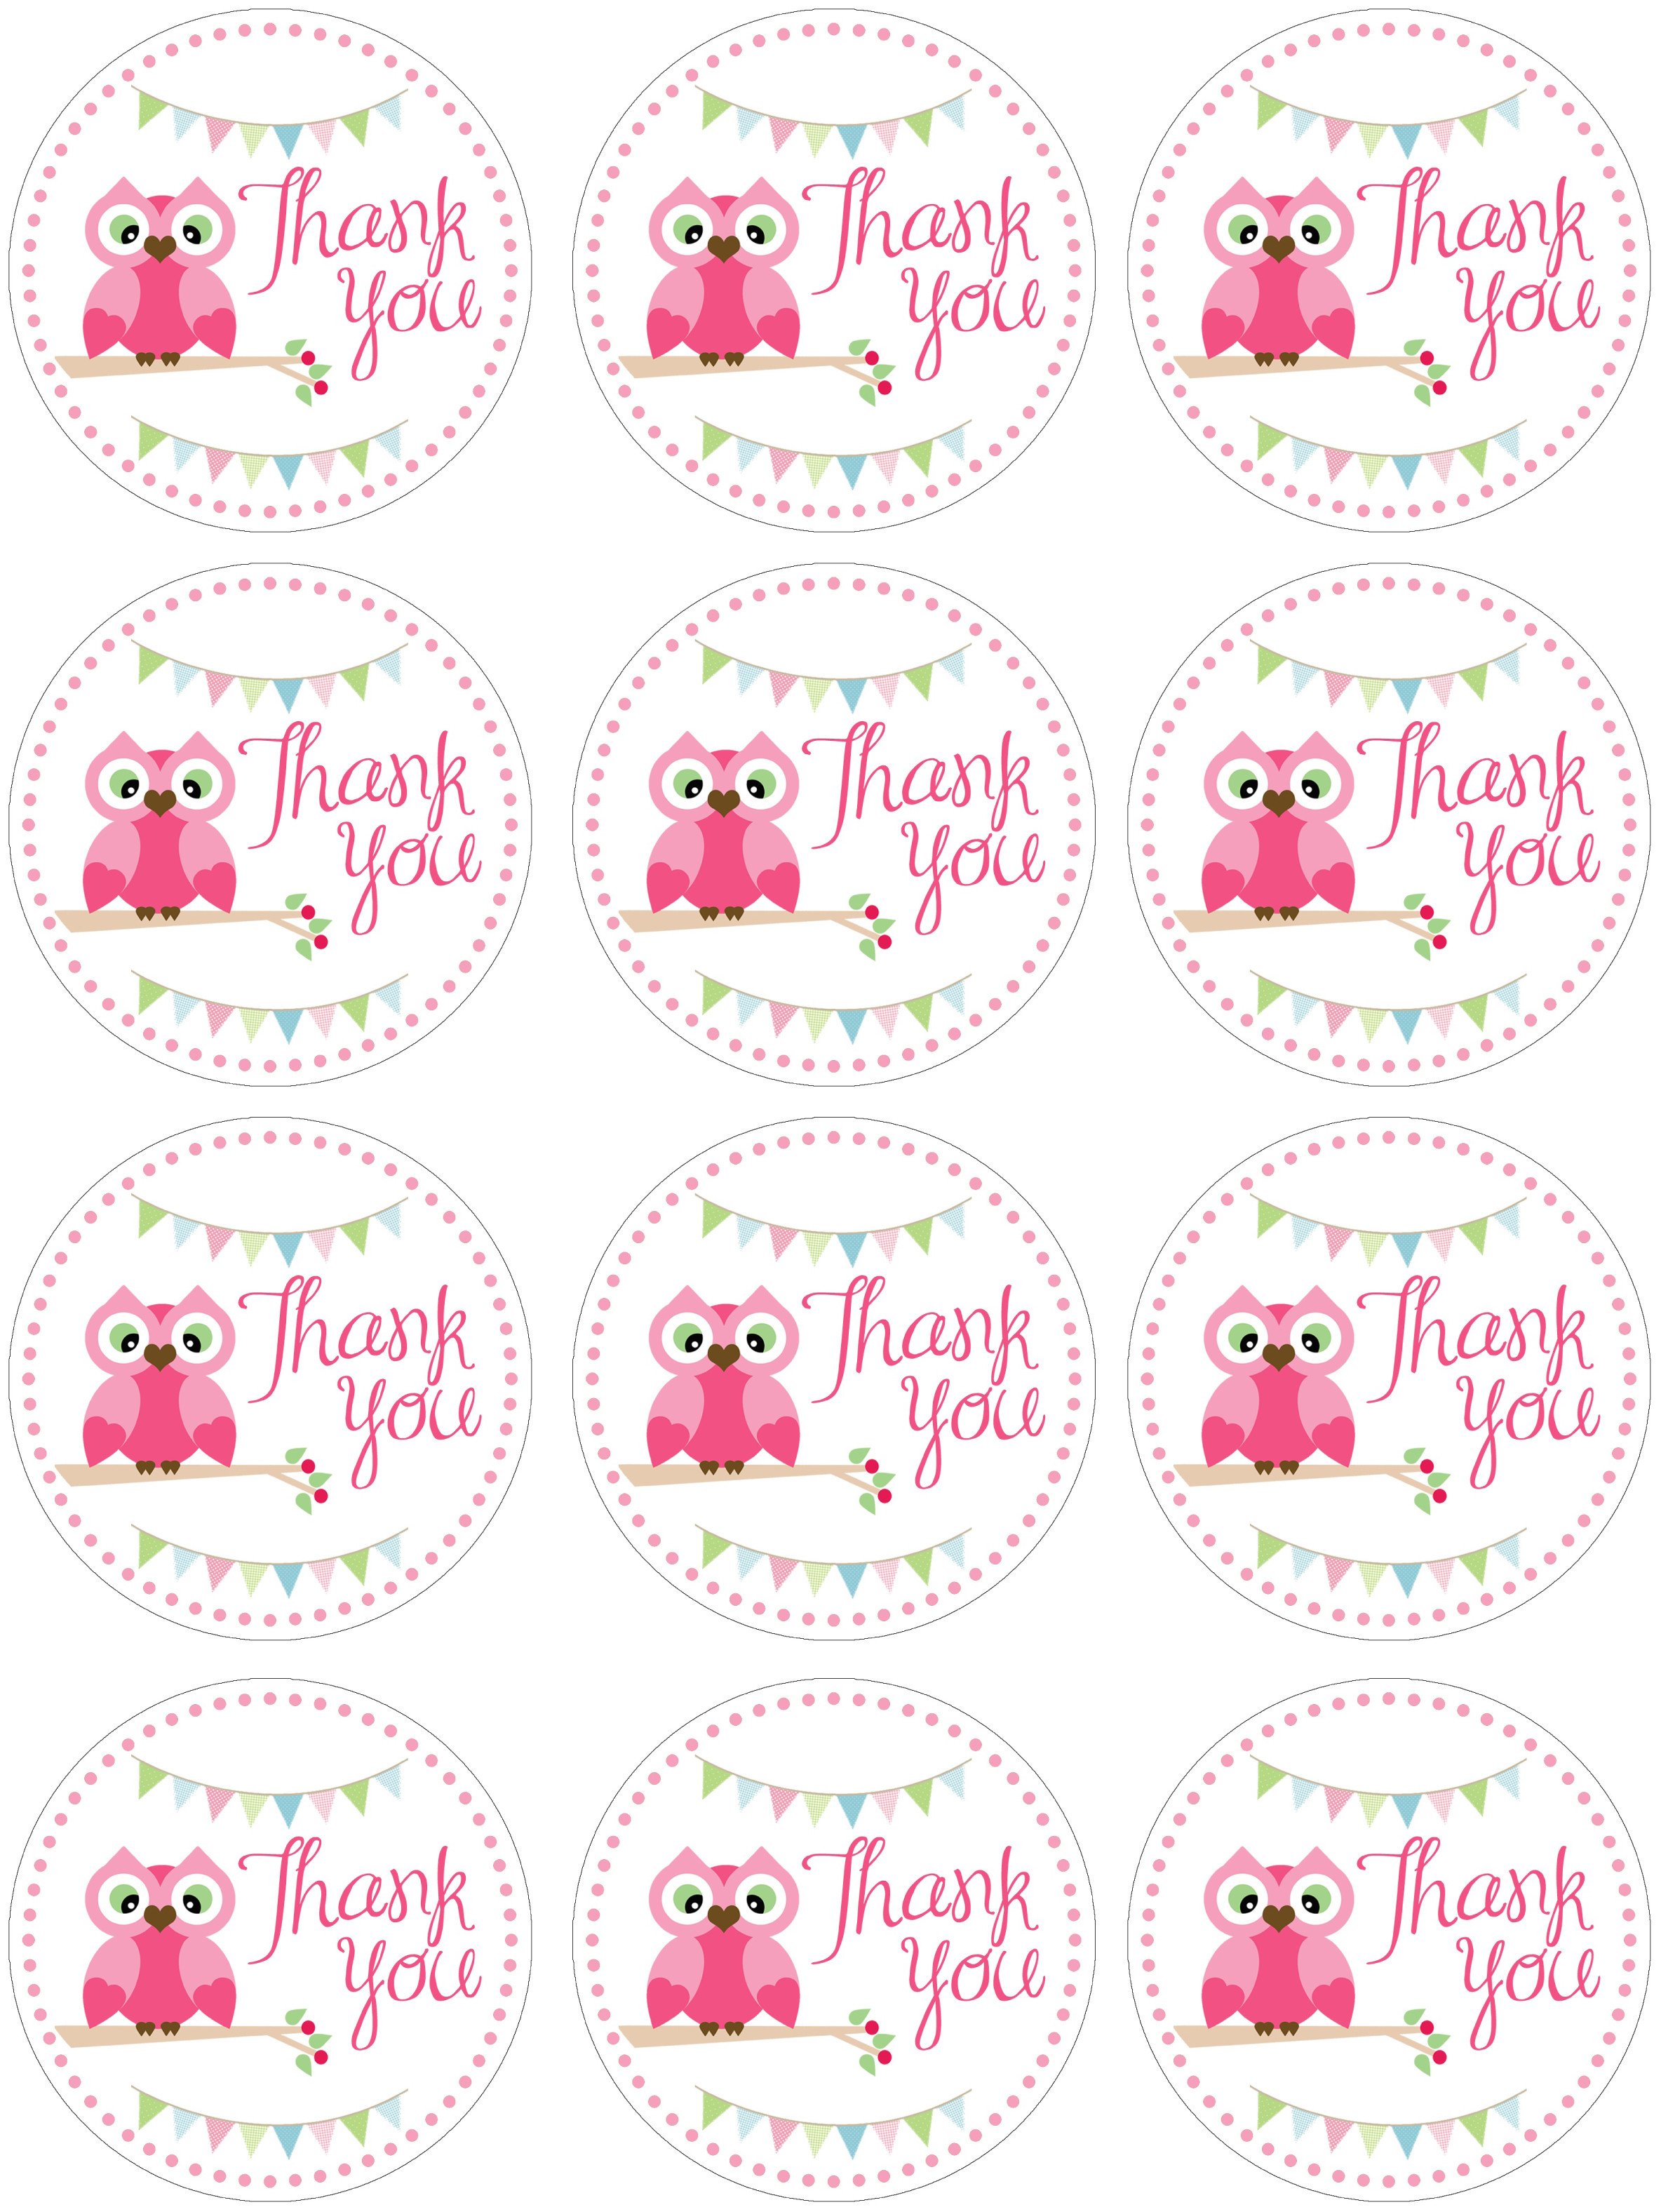 Owl Themed Birthday Party with FREE Printables How to